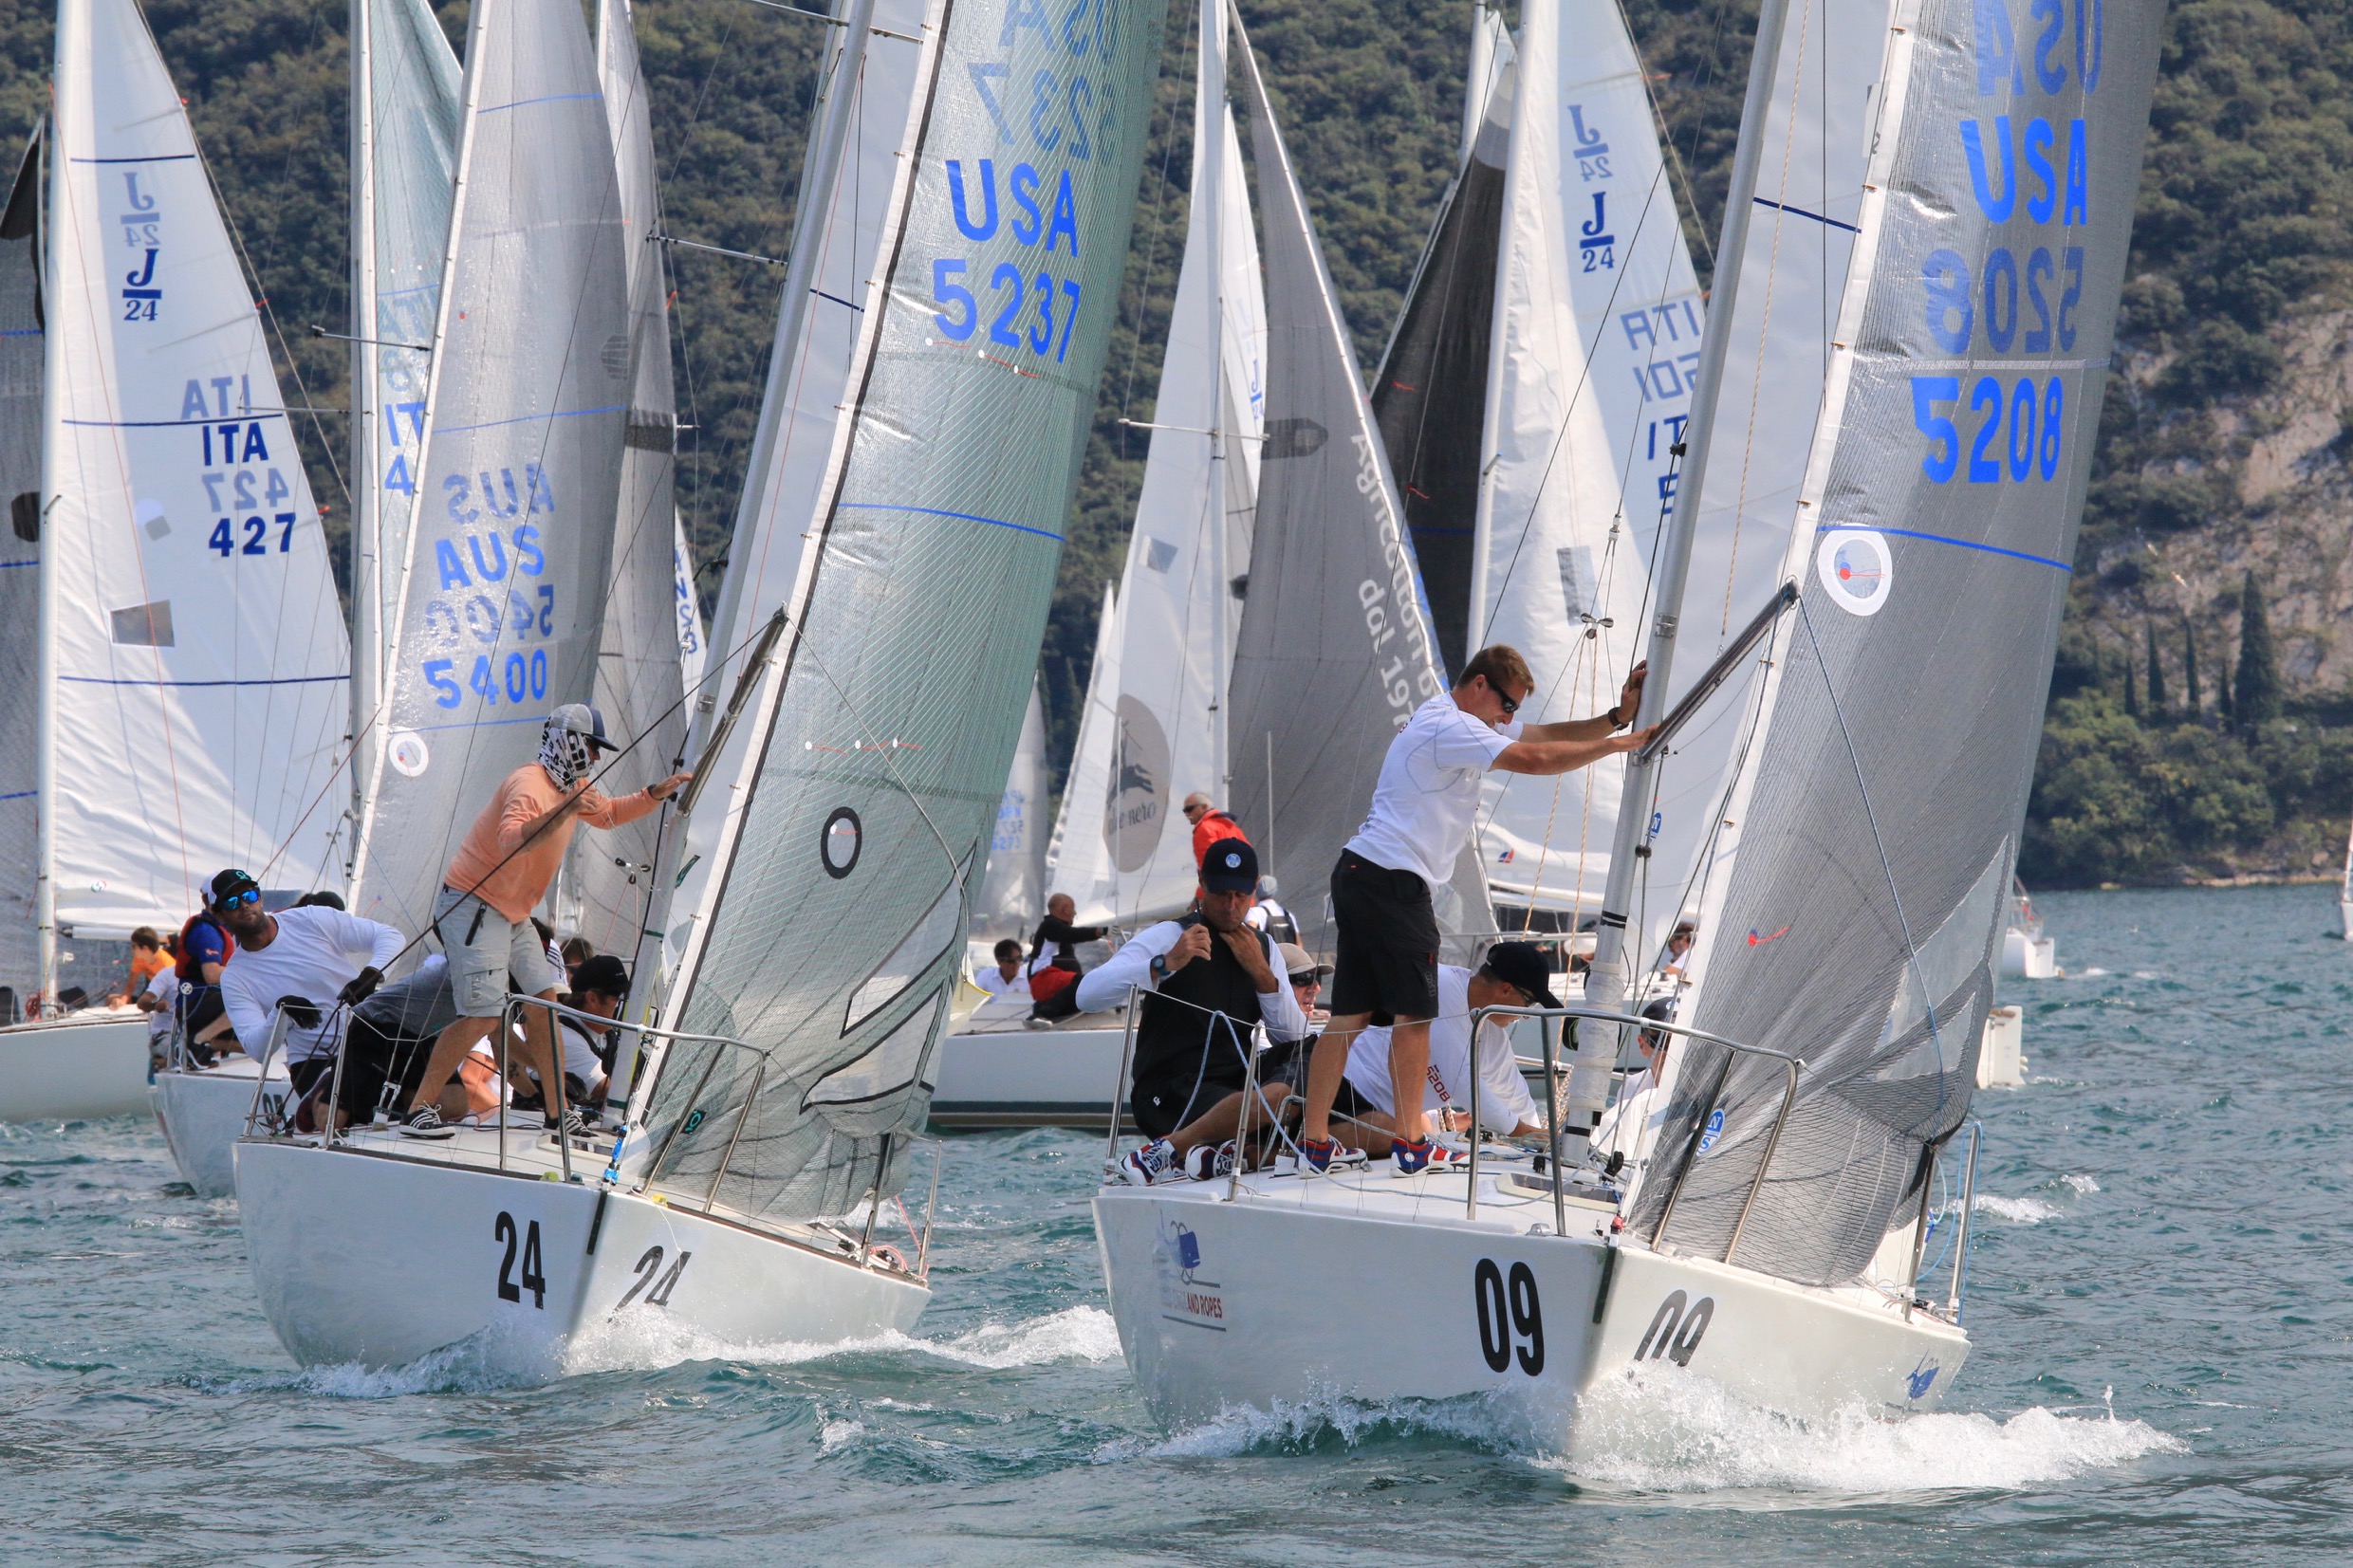  J/24  World Championship 2018  Riva ITA  Day 5, Welles USA in pole position for today's last races